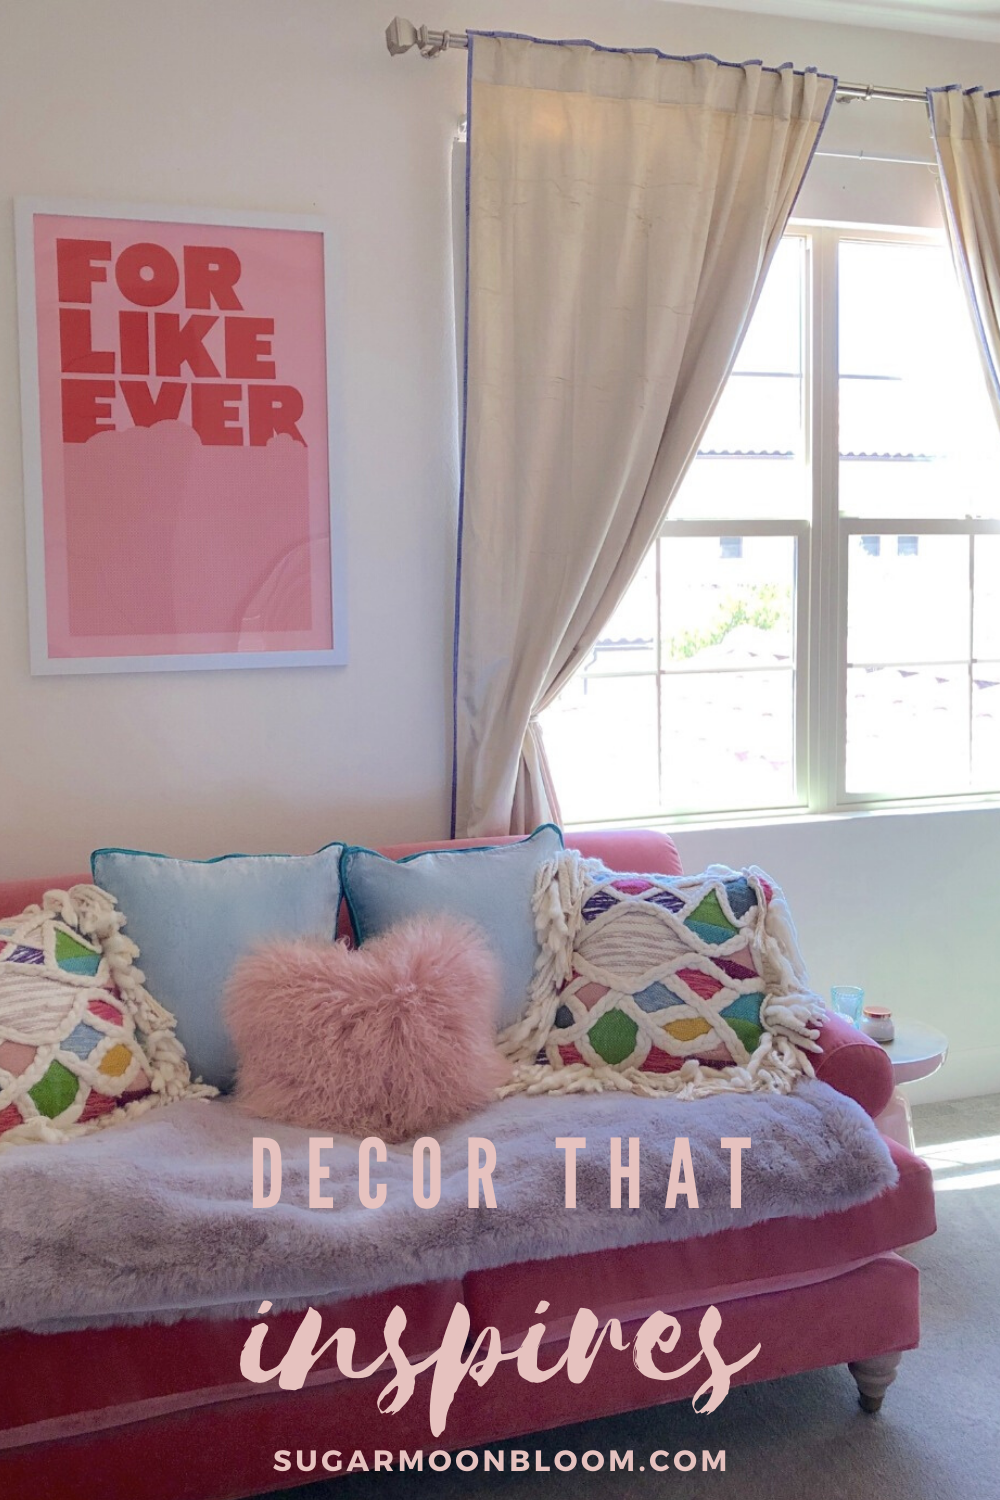 Decor that inspires room inspiration.png